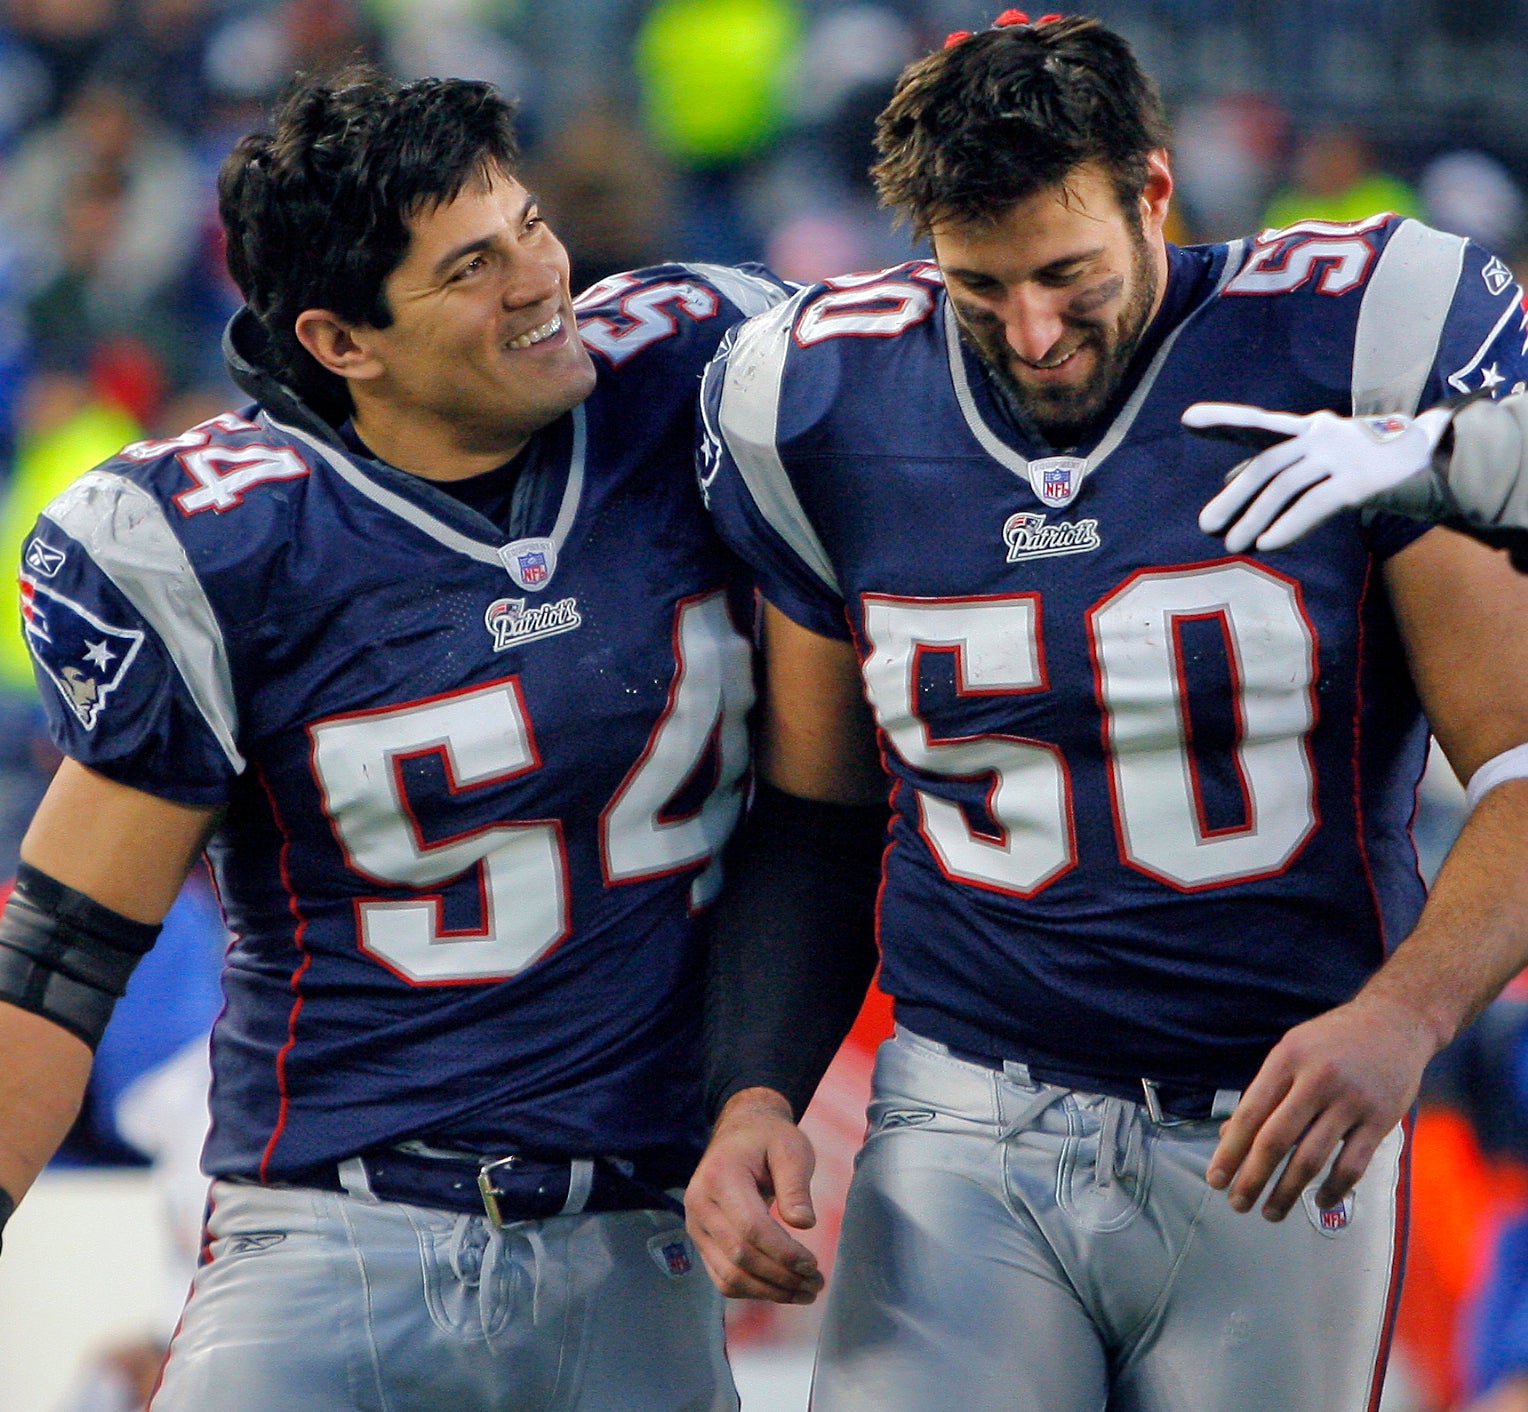 Mike Vrabel voted into Patriots Hall of Fame